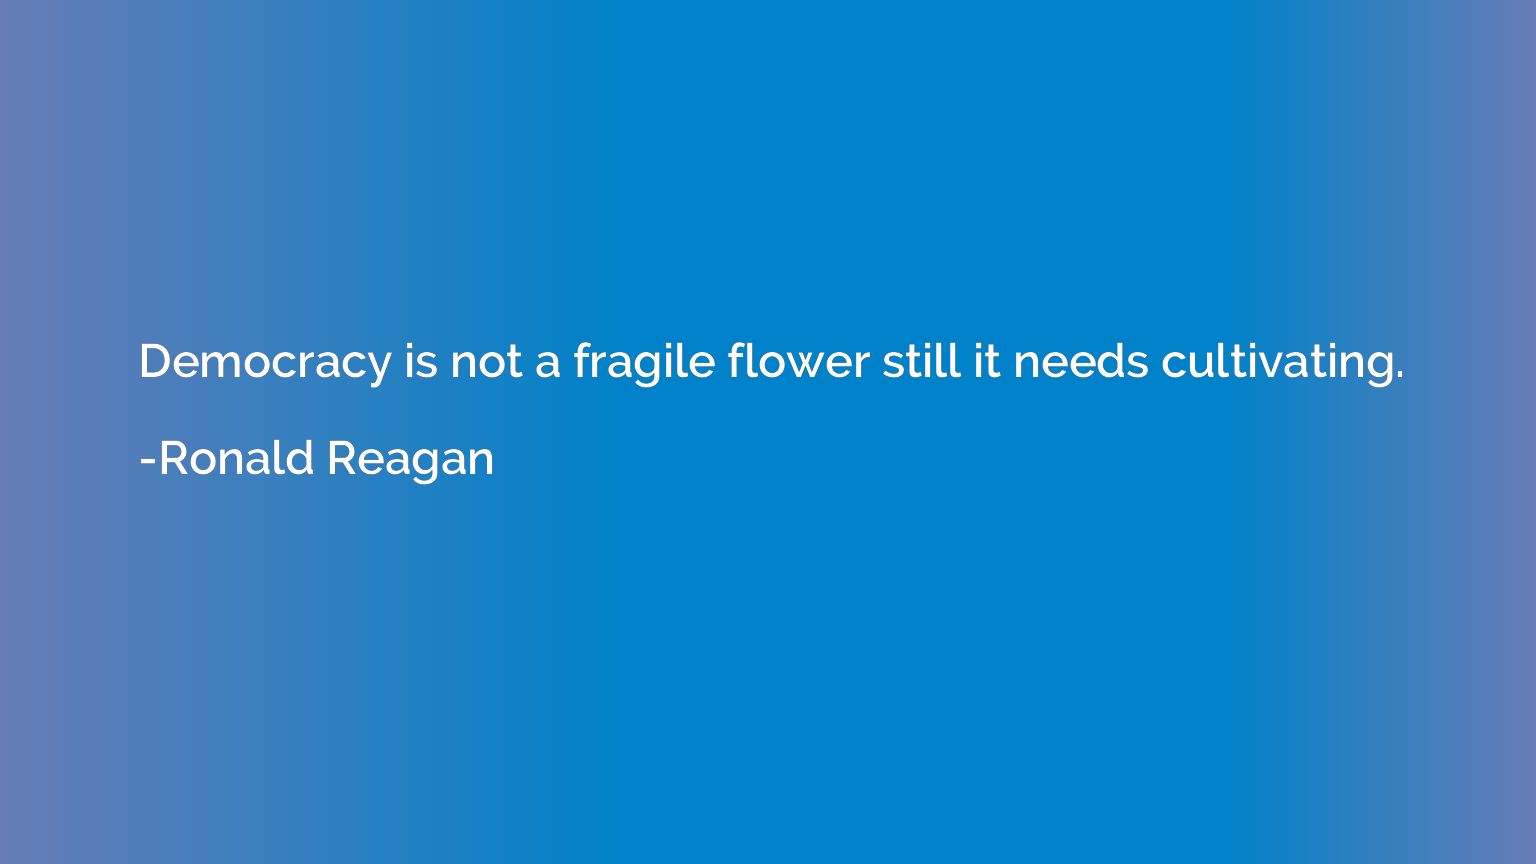 Democracy is not a fragile flower still it needs cultivating